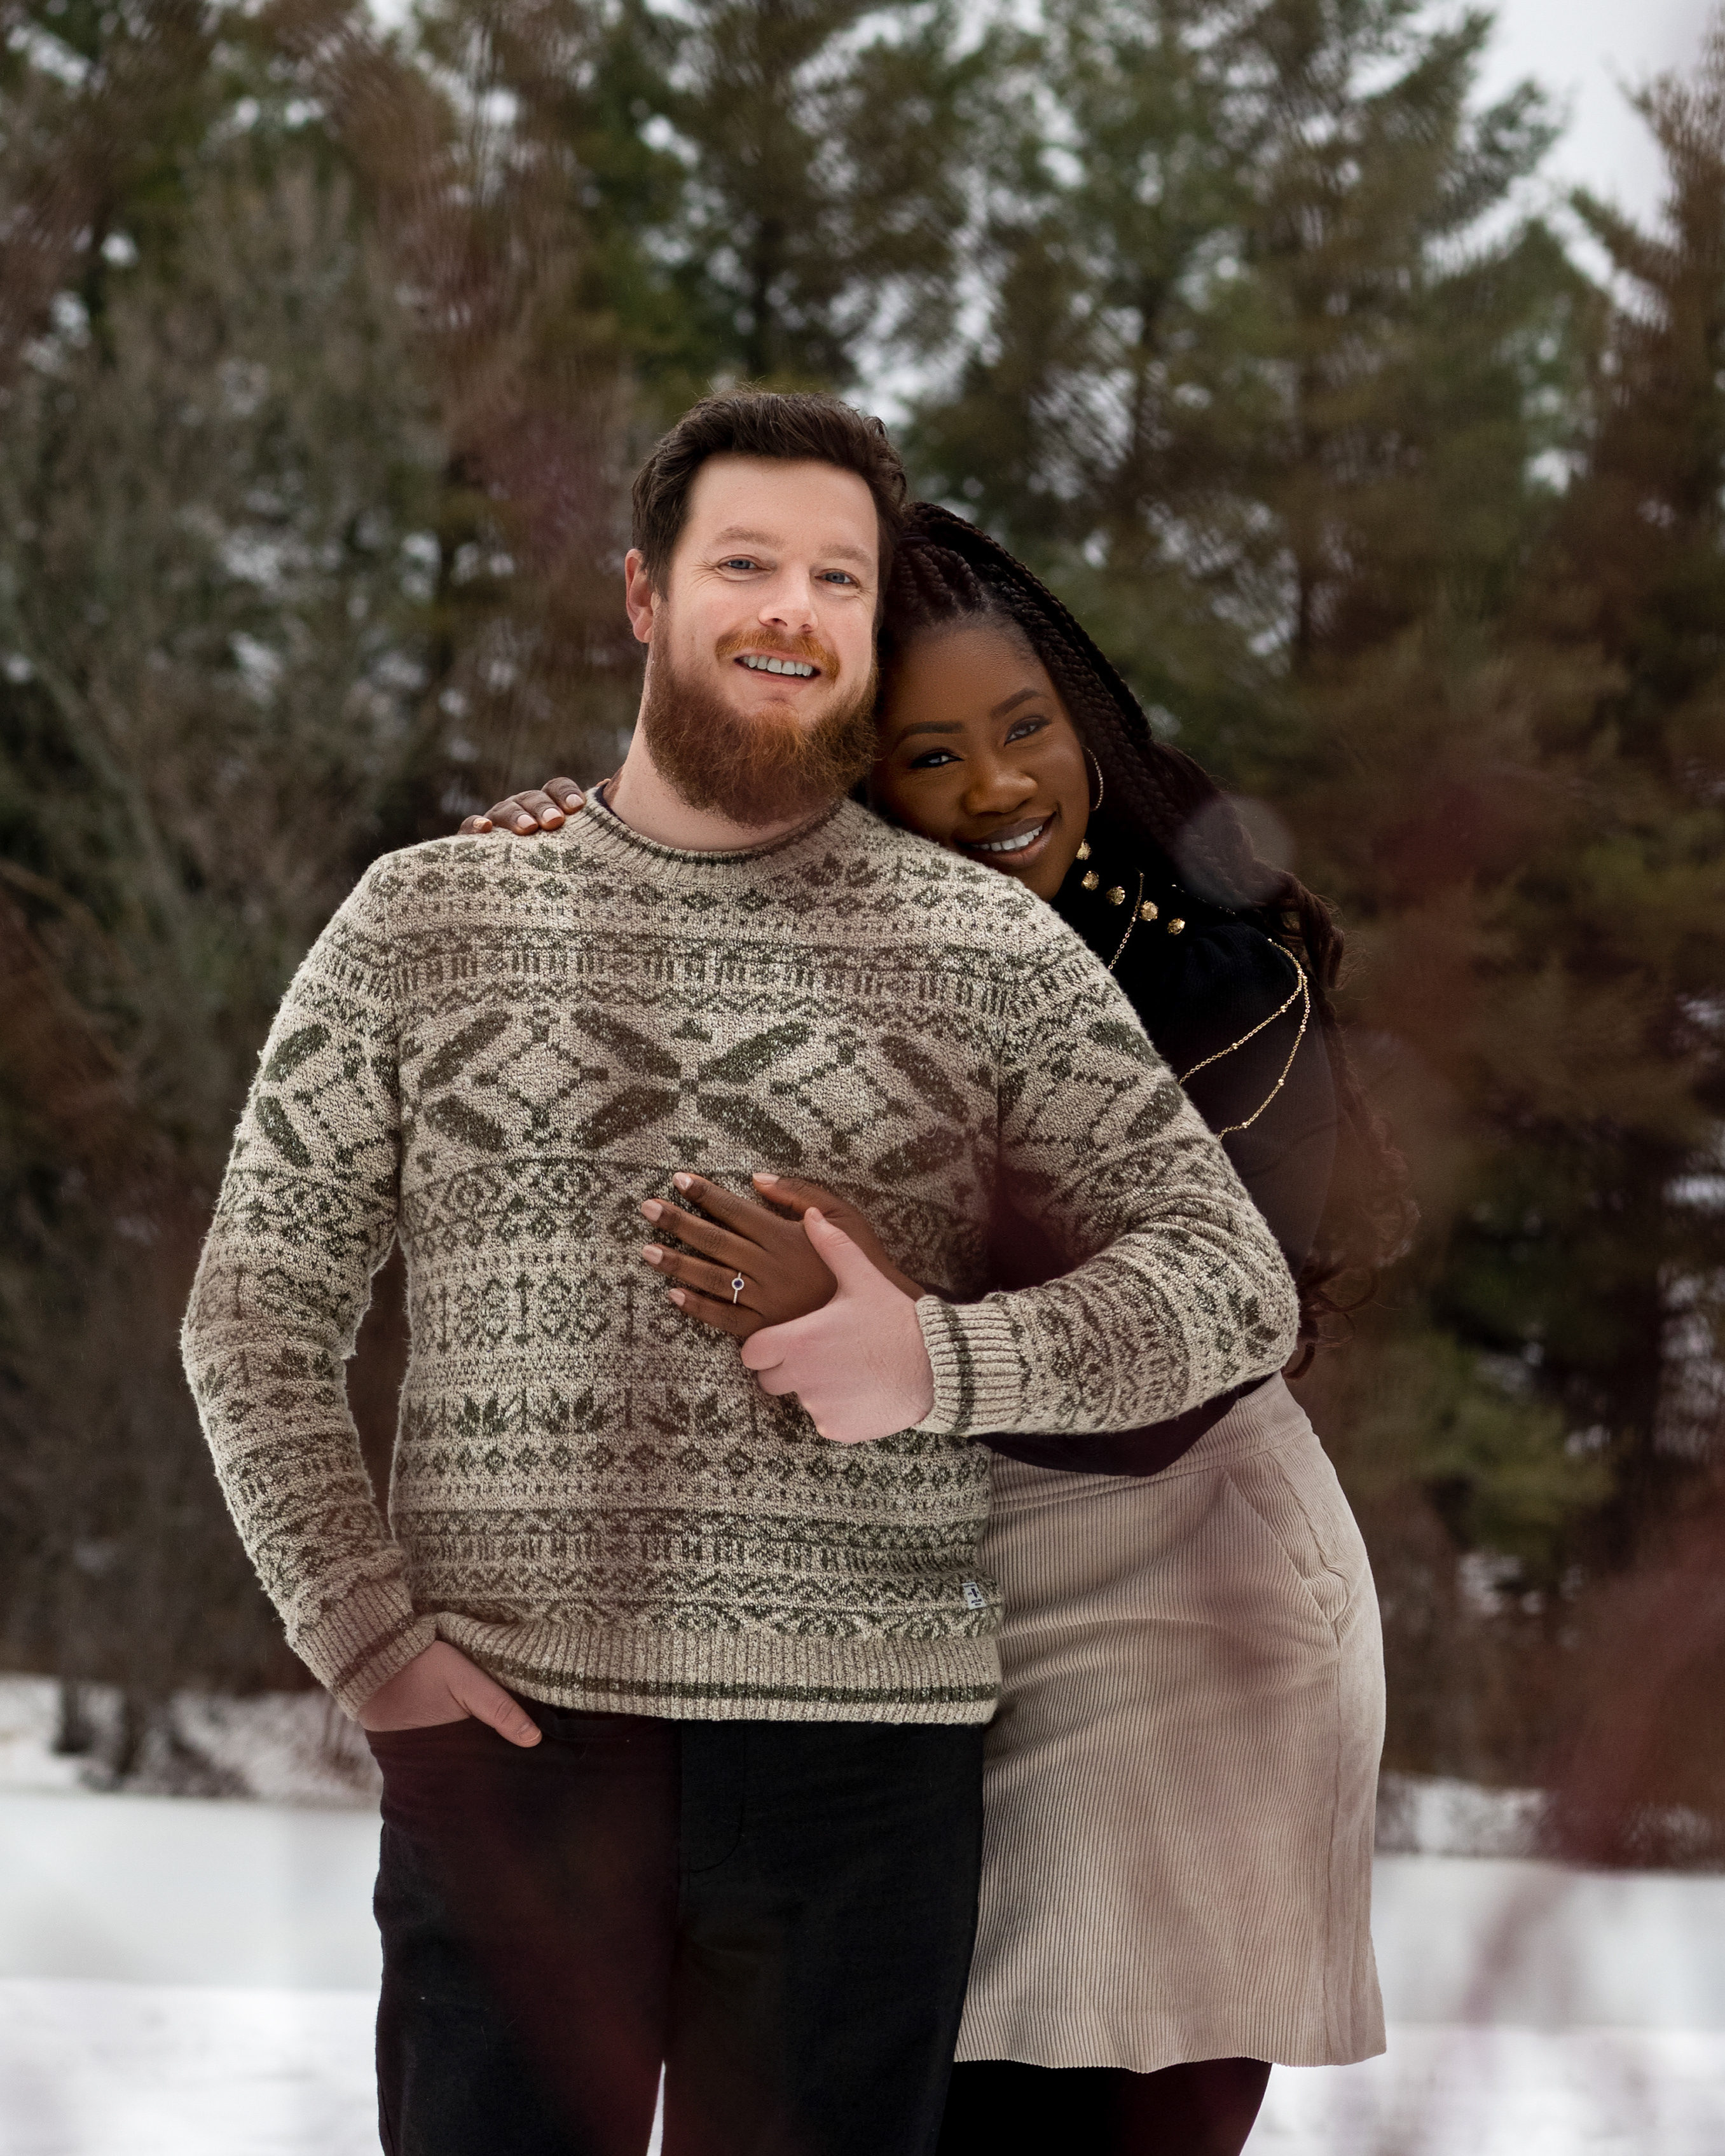 Engagement photo of Ehi hugging Andrew from behind.